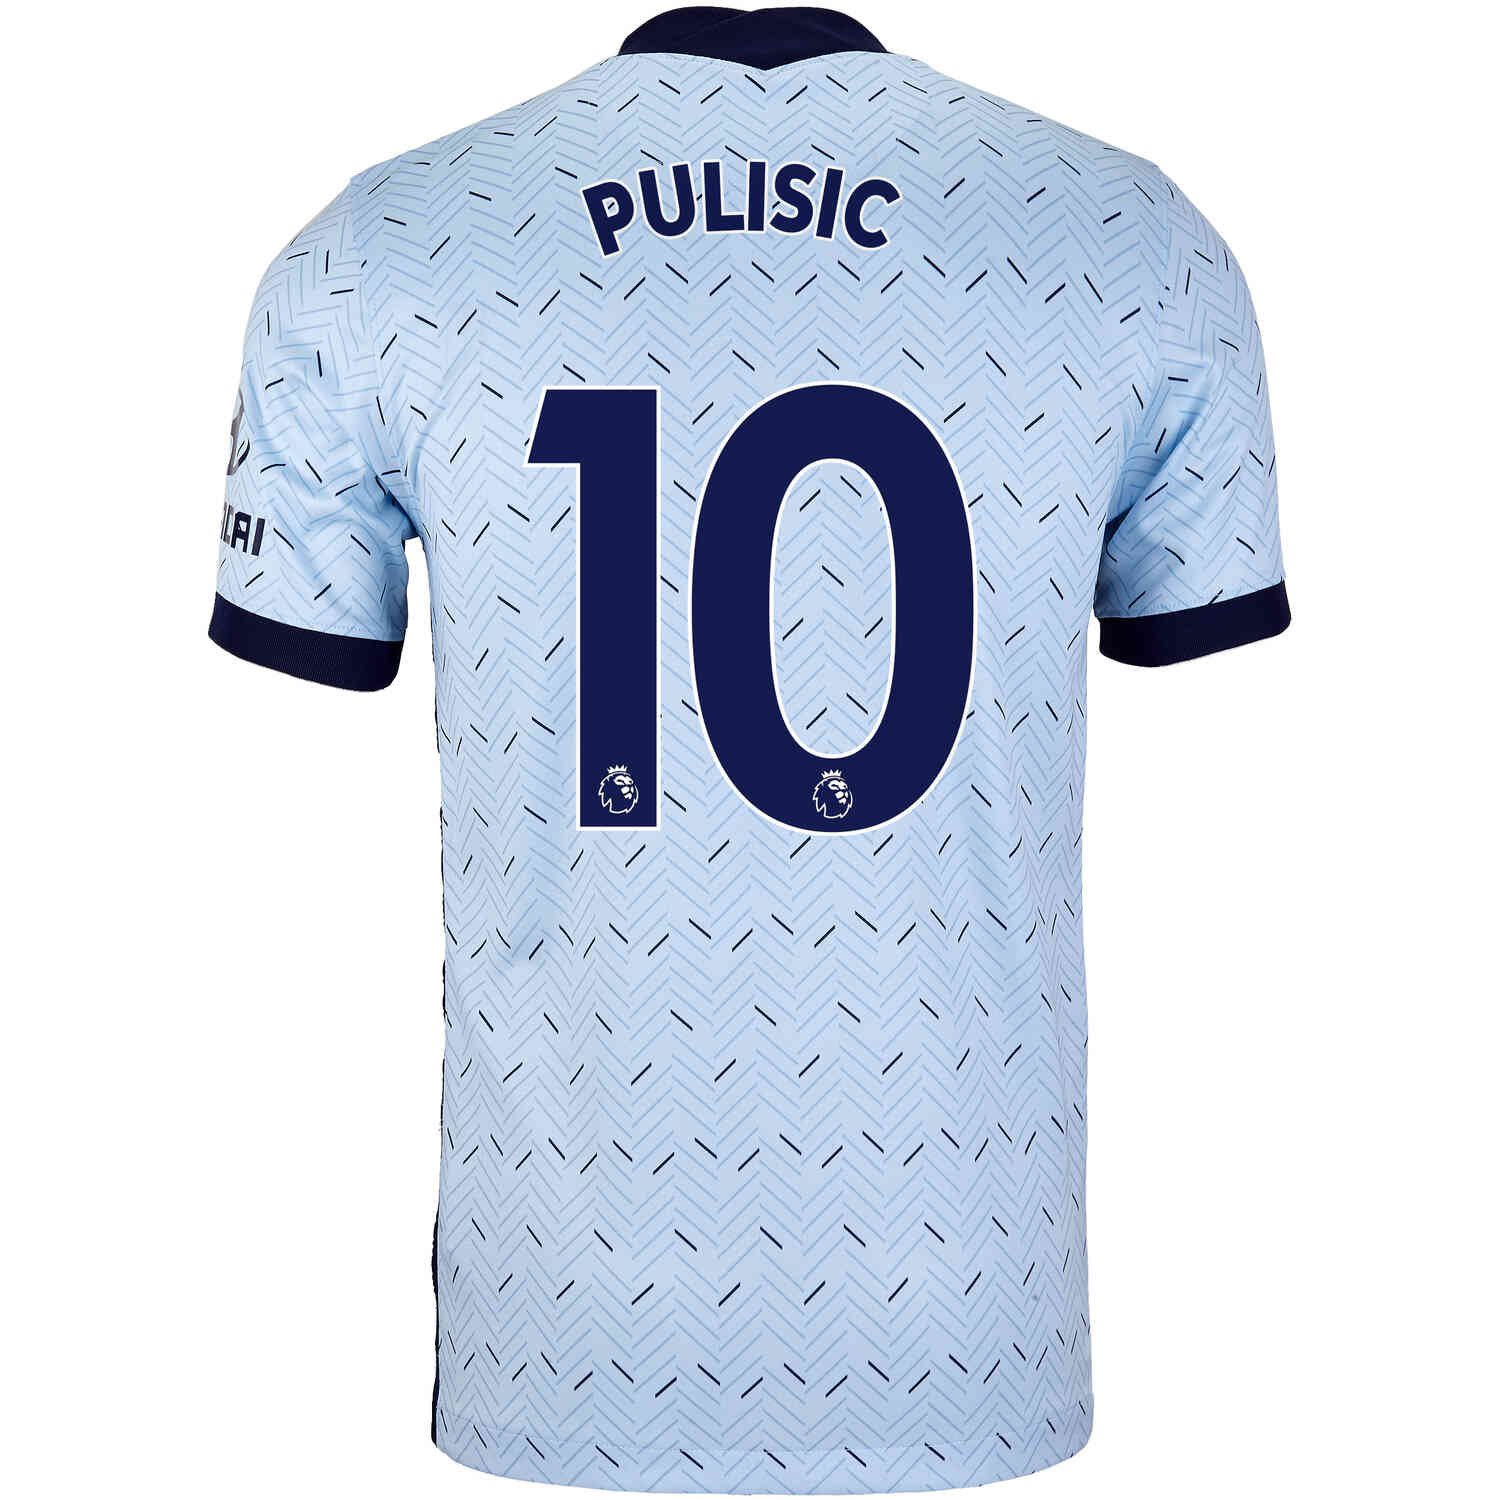 2020/21 Kids Christian Pulisic Chelsea Away Jersey - Soccer Master